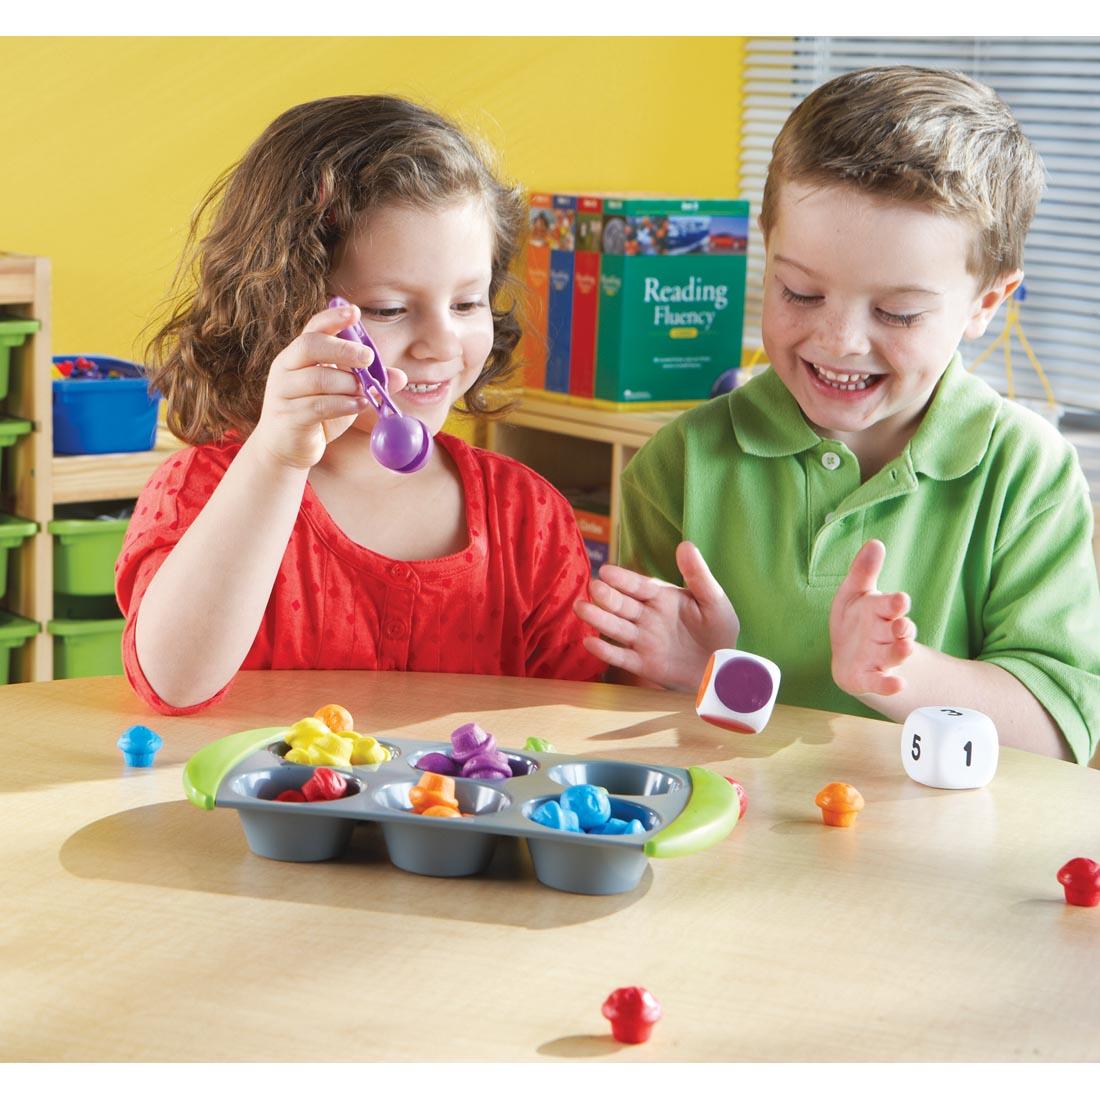 children rolling a colored die while playing Mini Muffin Match Up Set